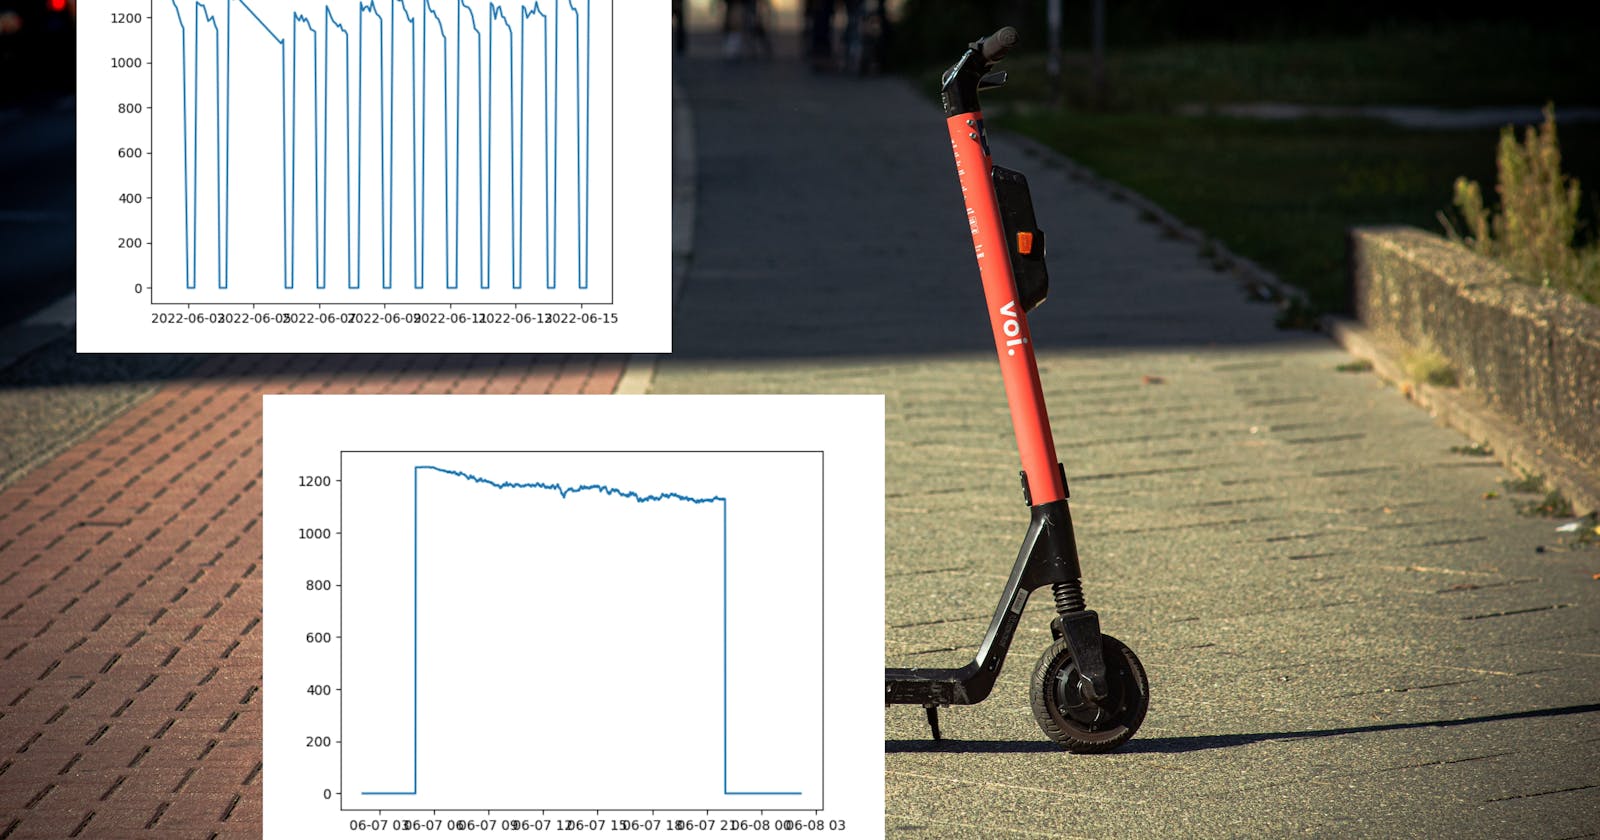 Where's my Voi scooter: [5] Data processing and analysing vehicle count data